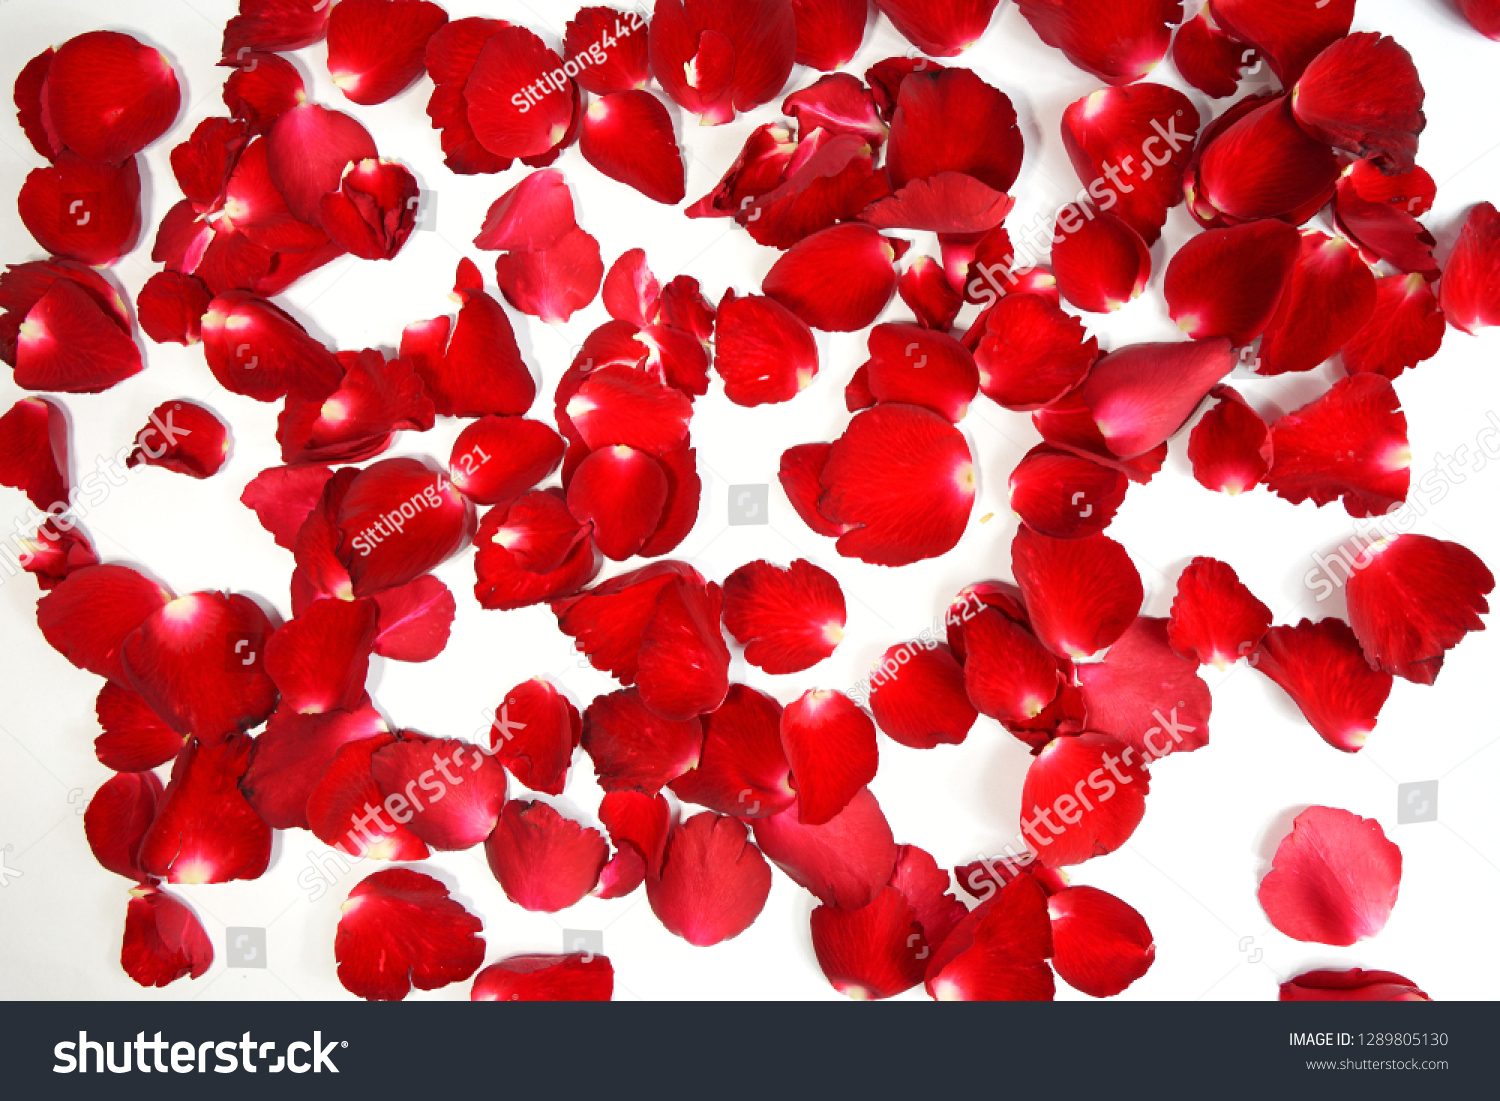 Background of beautiful red rose petals - Image #1289805130